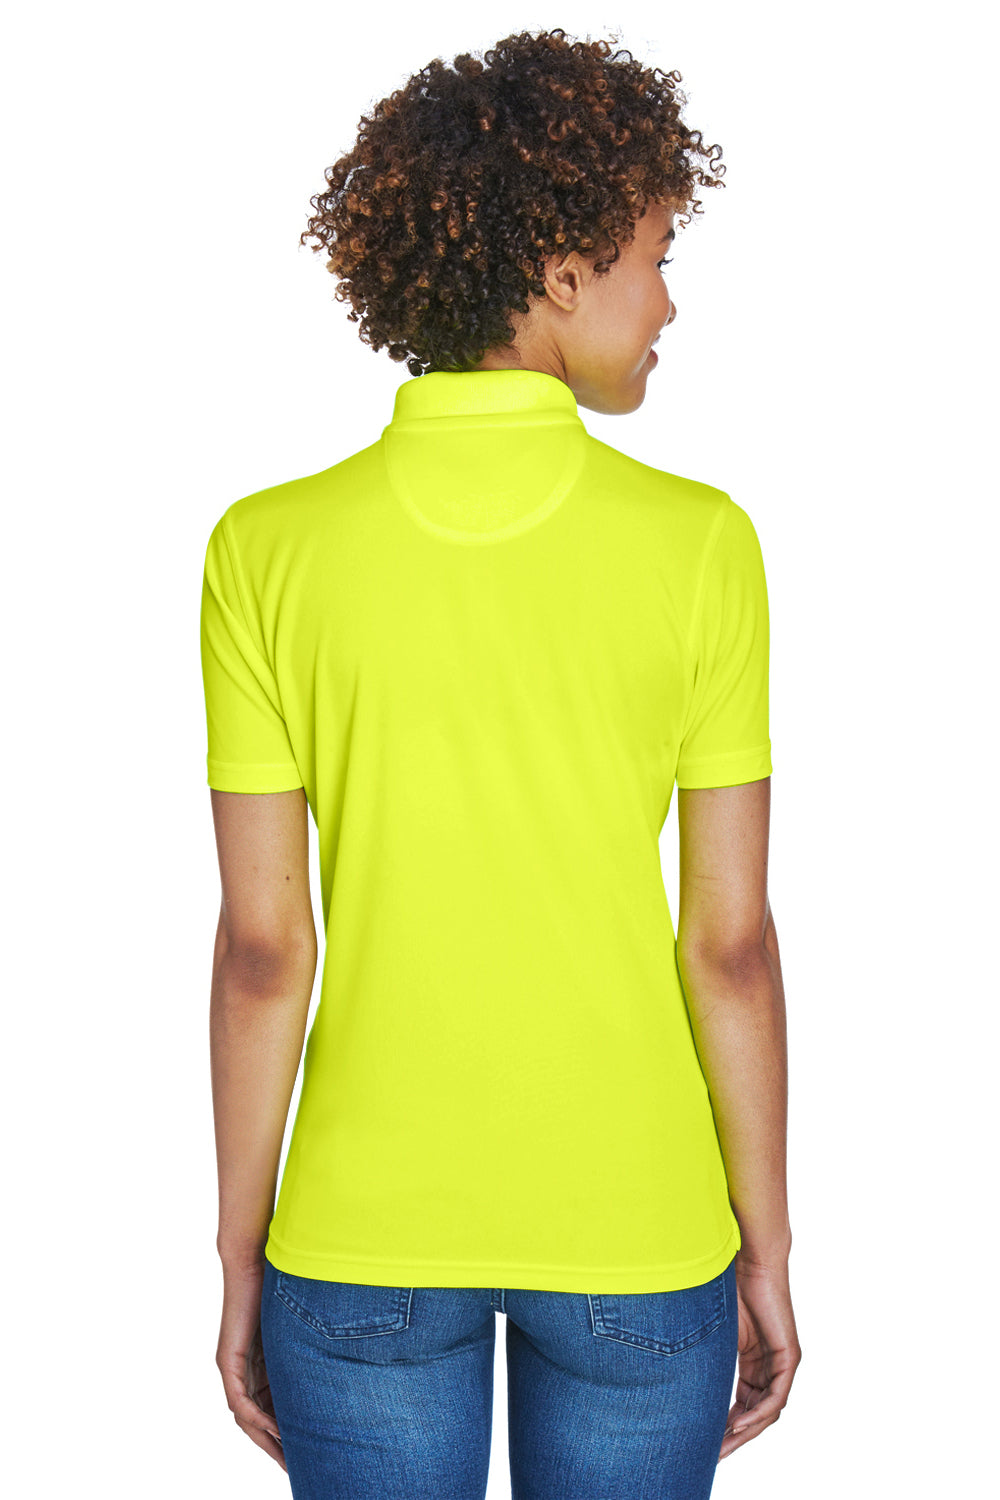 UltraClub 8210L Womens Cool & Dry Moisture Wicking Short Sleeve Polo Shirt Bright Yellow Back